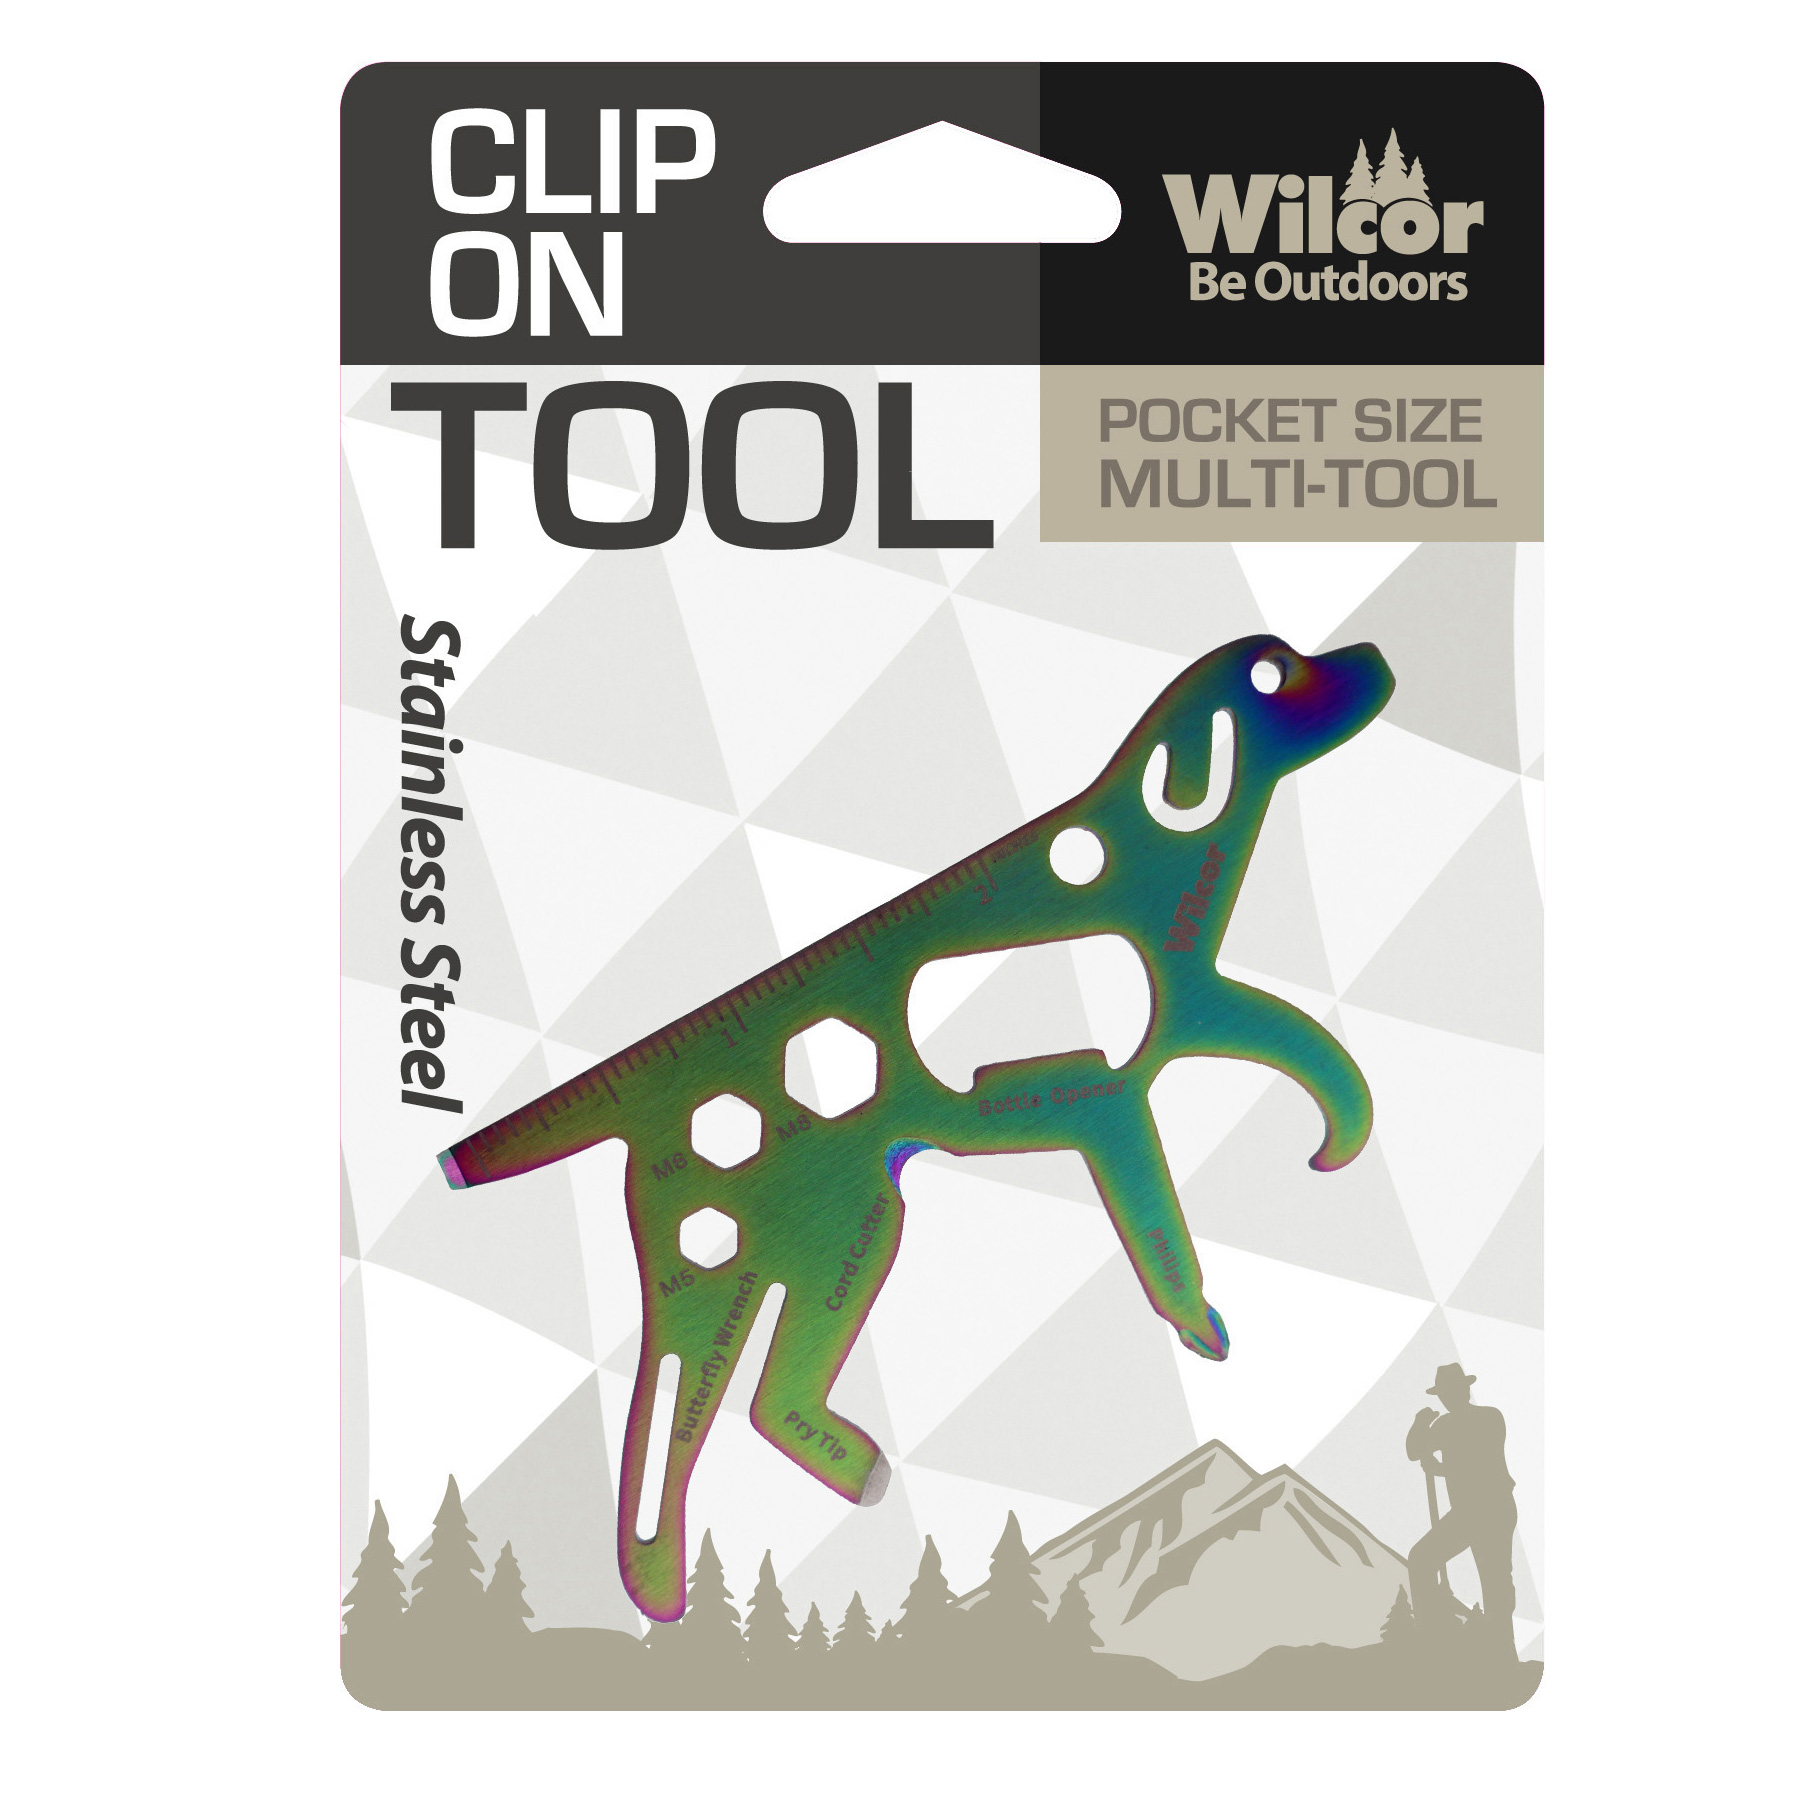 https://www.wilcor.net/productimages/cmp0728_clip_on_tools_dog_carded.jpg